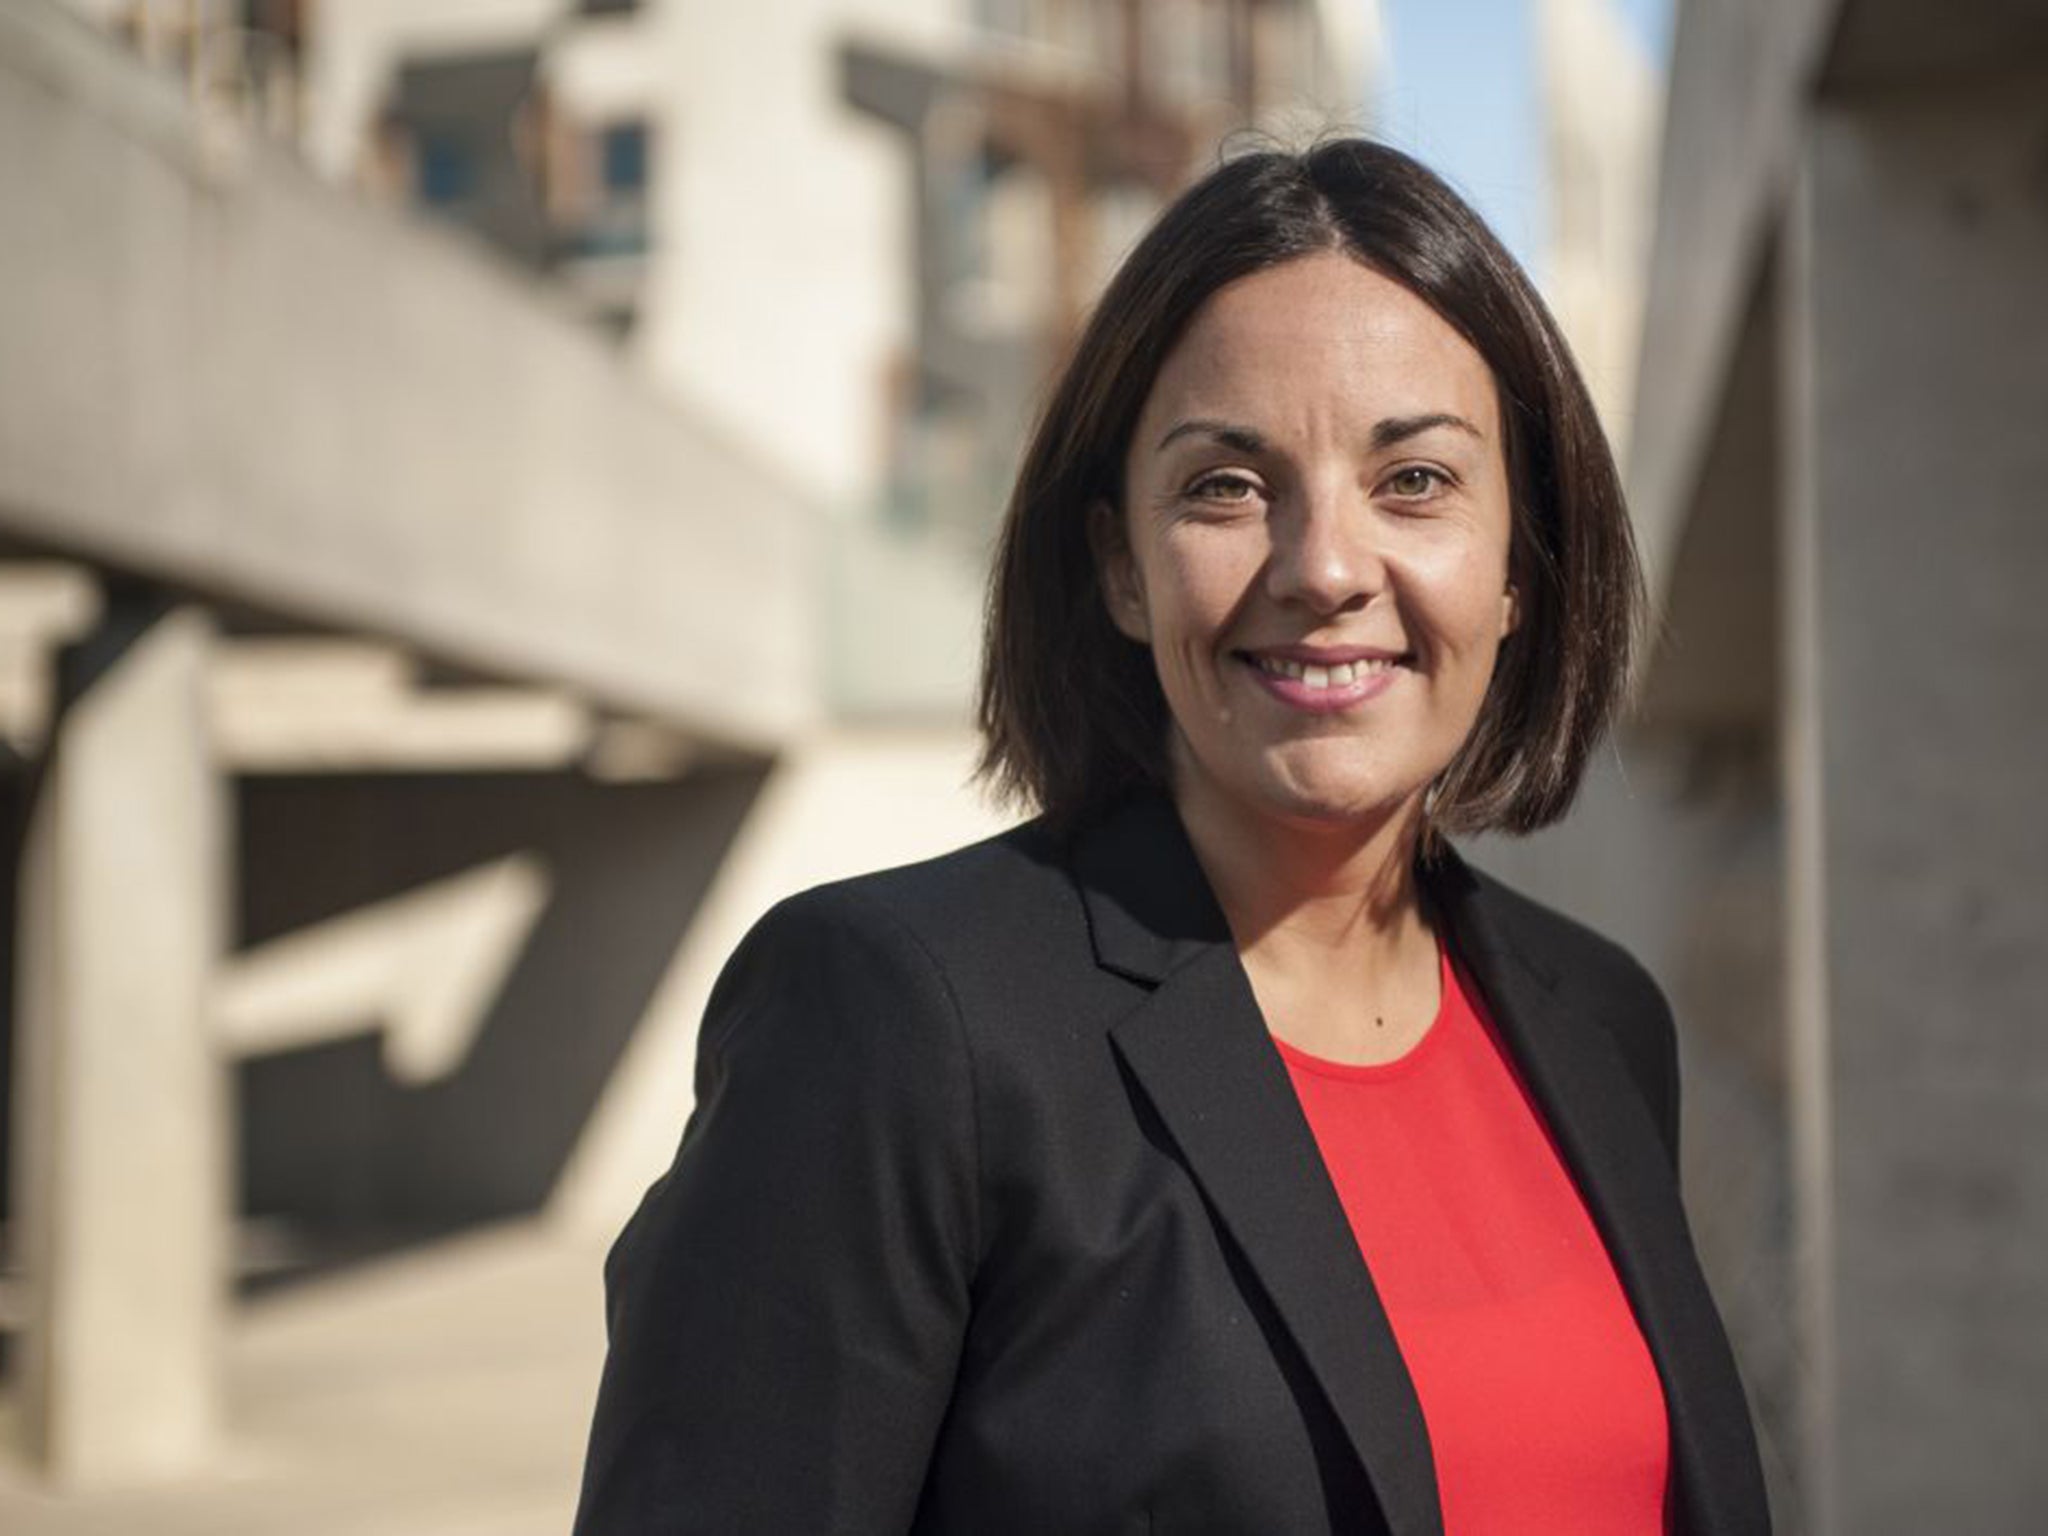 Kezia Dugdale is uncertain how many years it could take Labour to win back the trust of voters